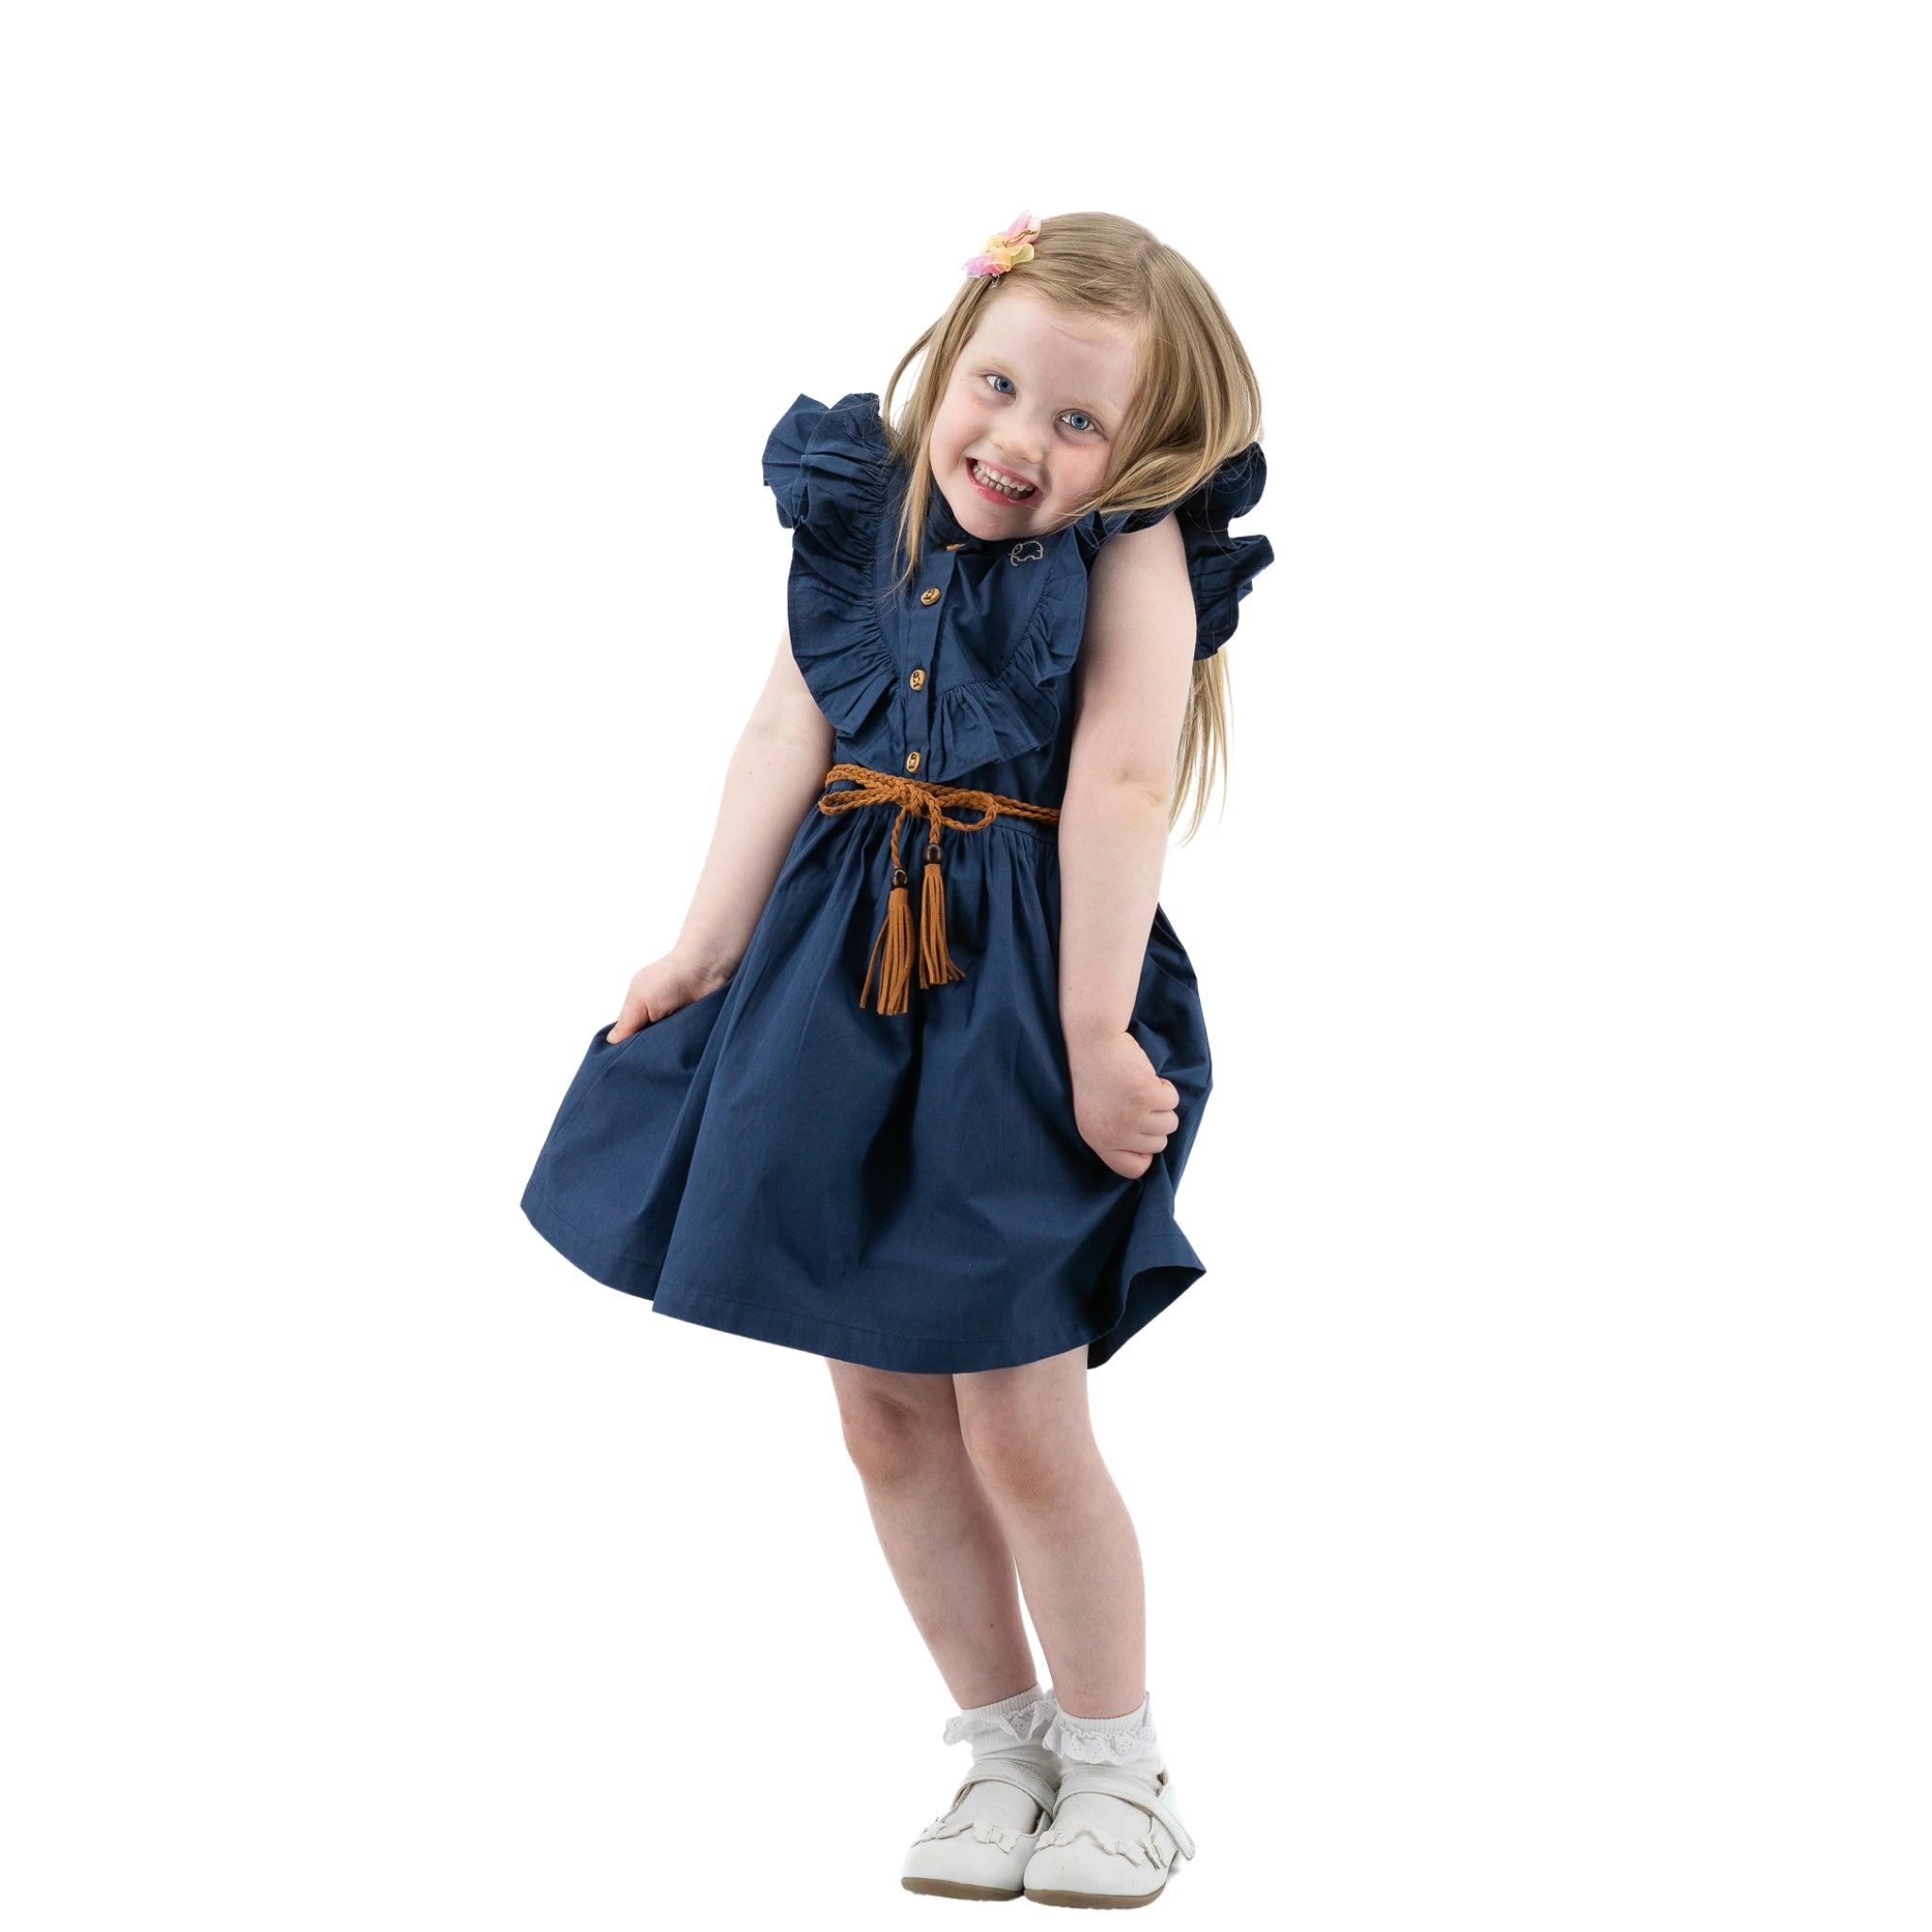 A little girl in a Navy Blue Butterfly Sleeve Cotton Dress made by Karee, posing on a white background.